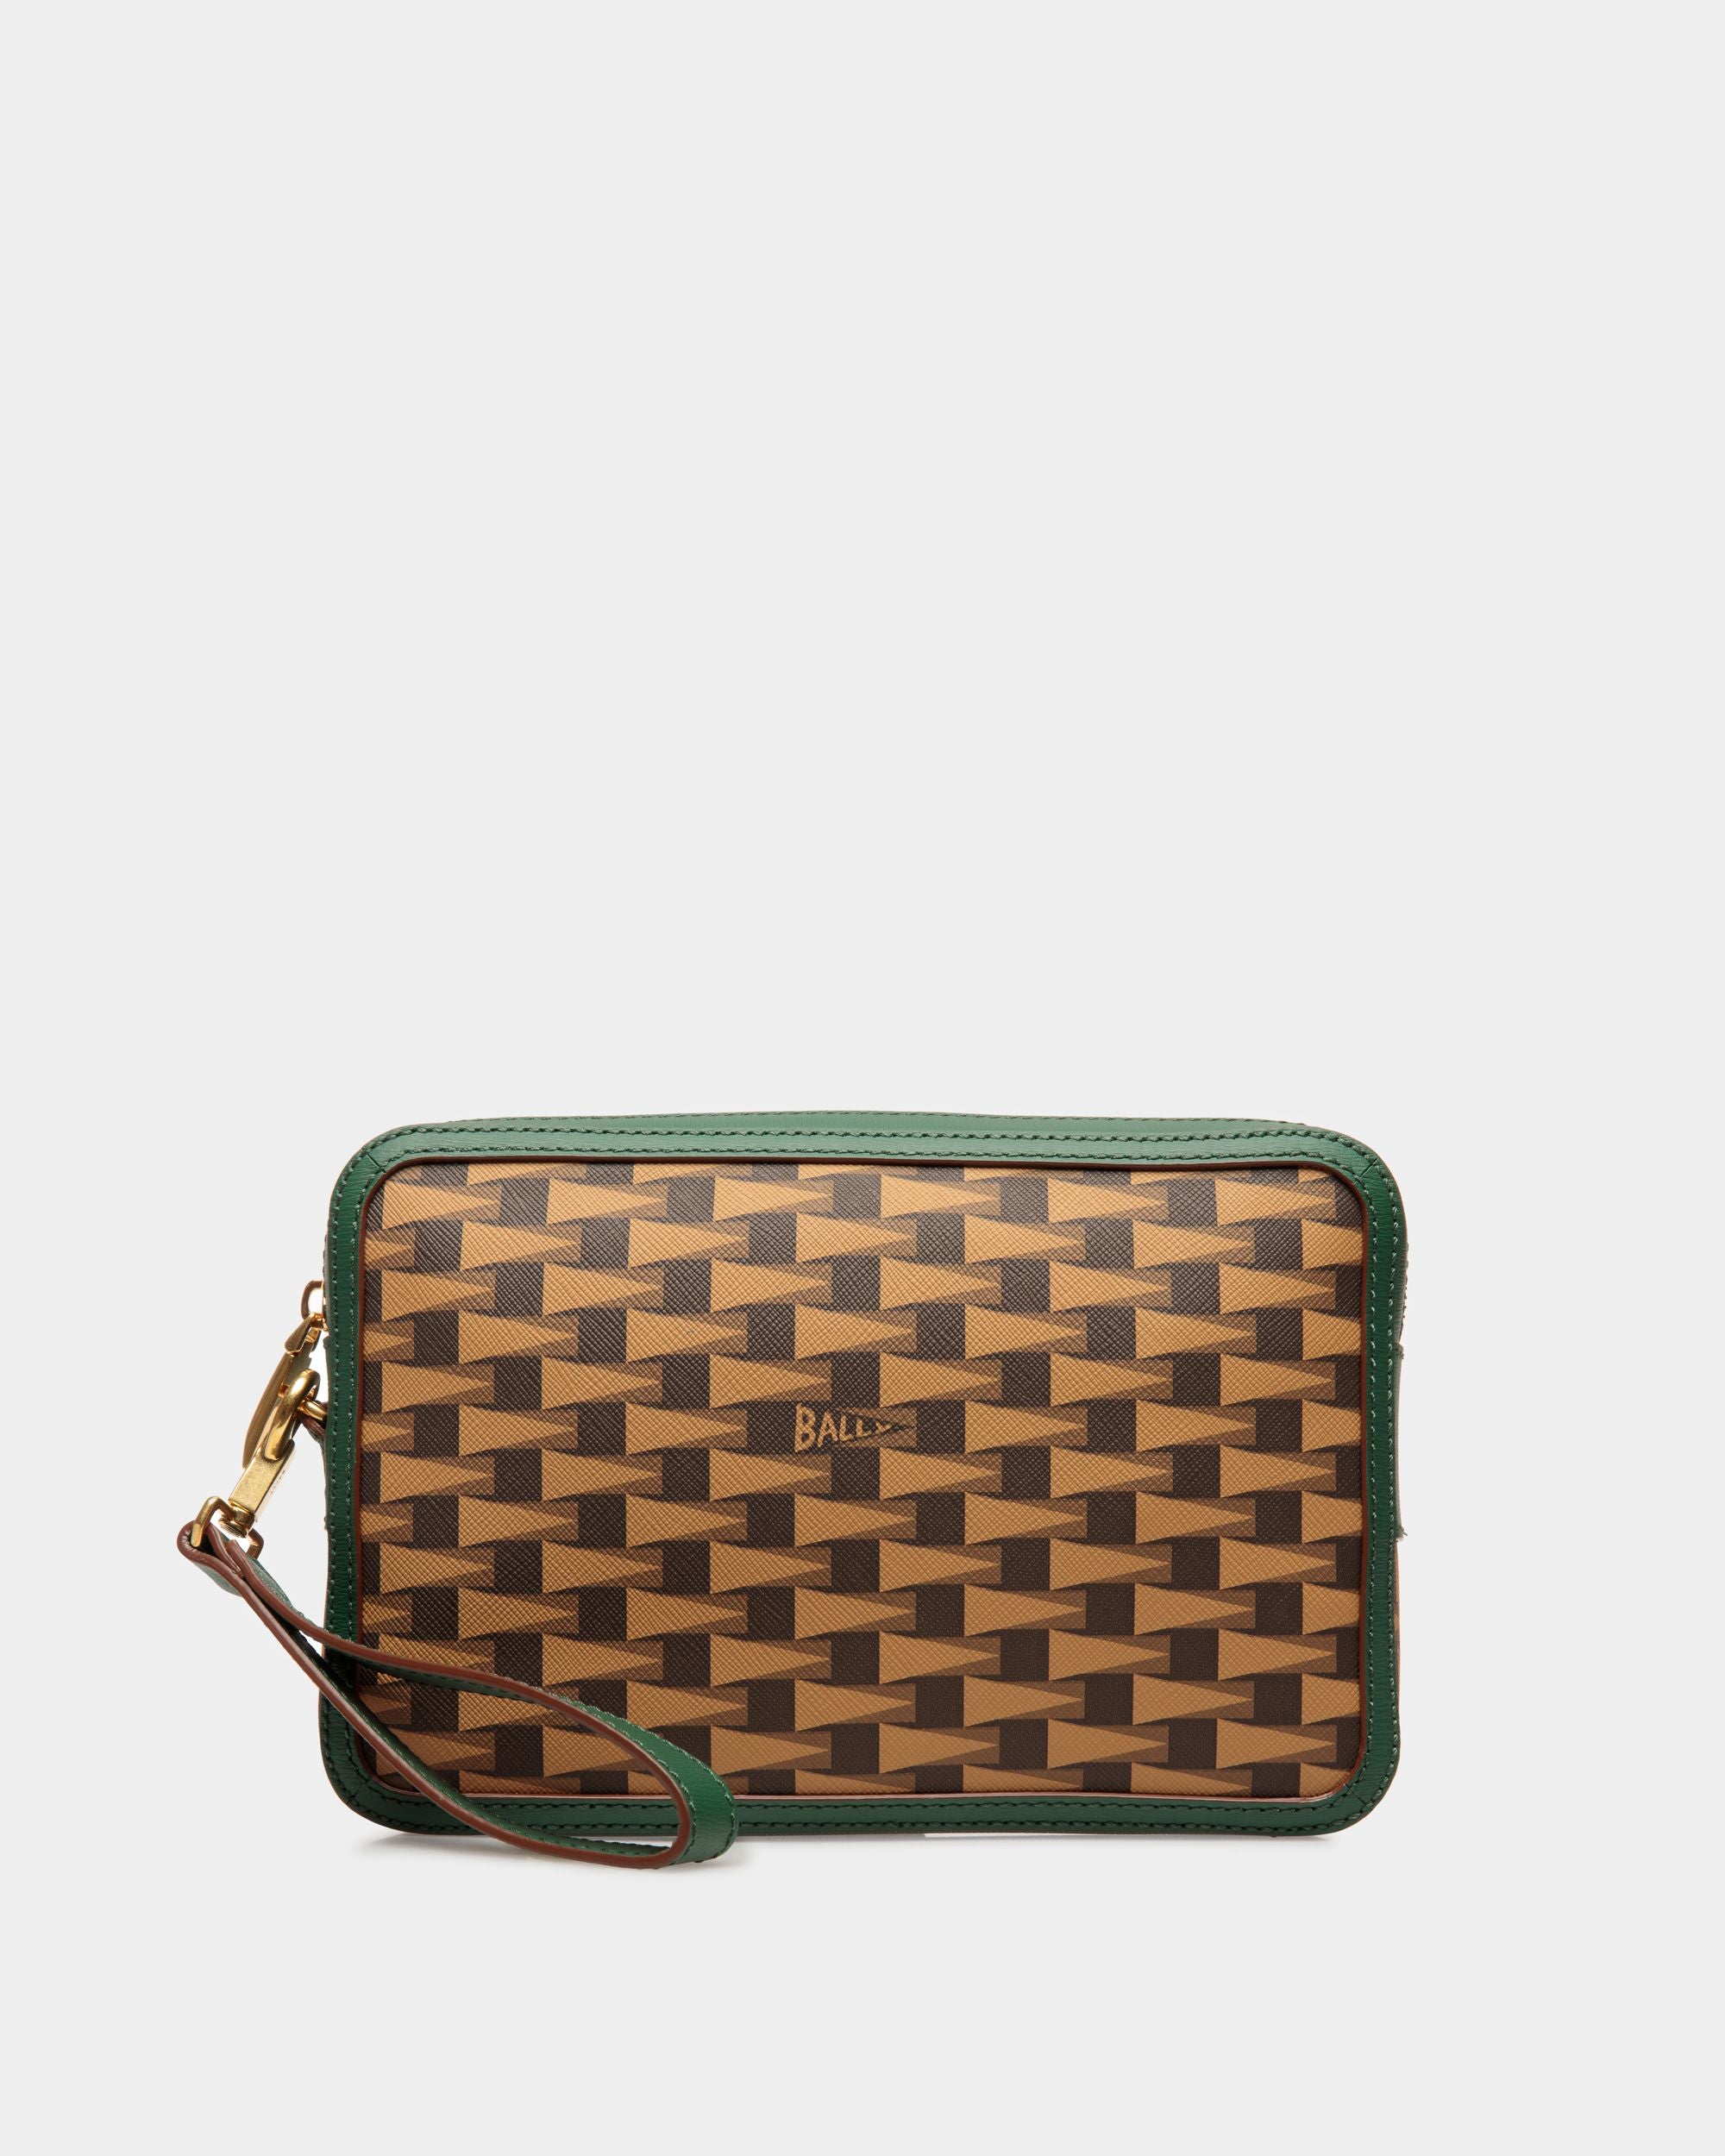 Pochette | Men's Clutches And Portfolios | Desert And Kelly Green Leather And TPU | Bally | Still Life Front